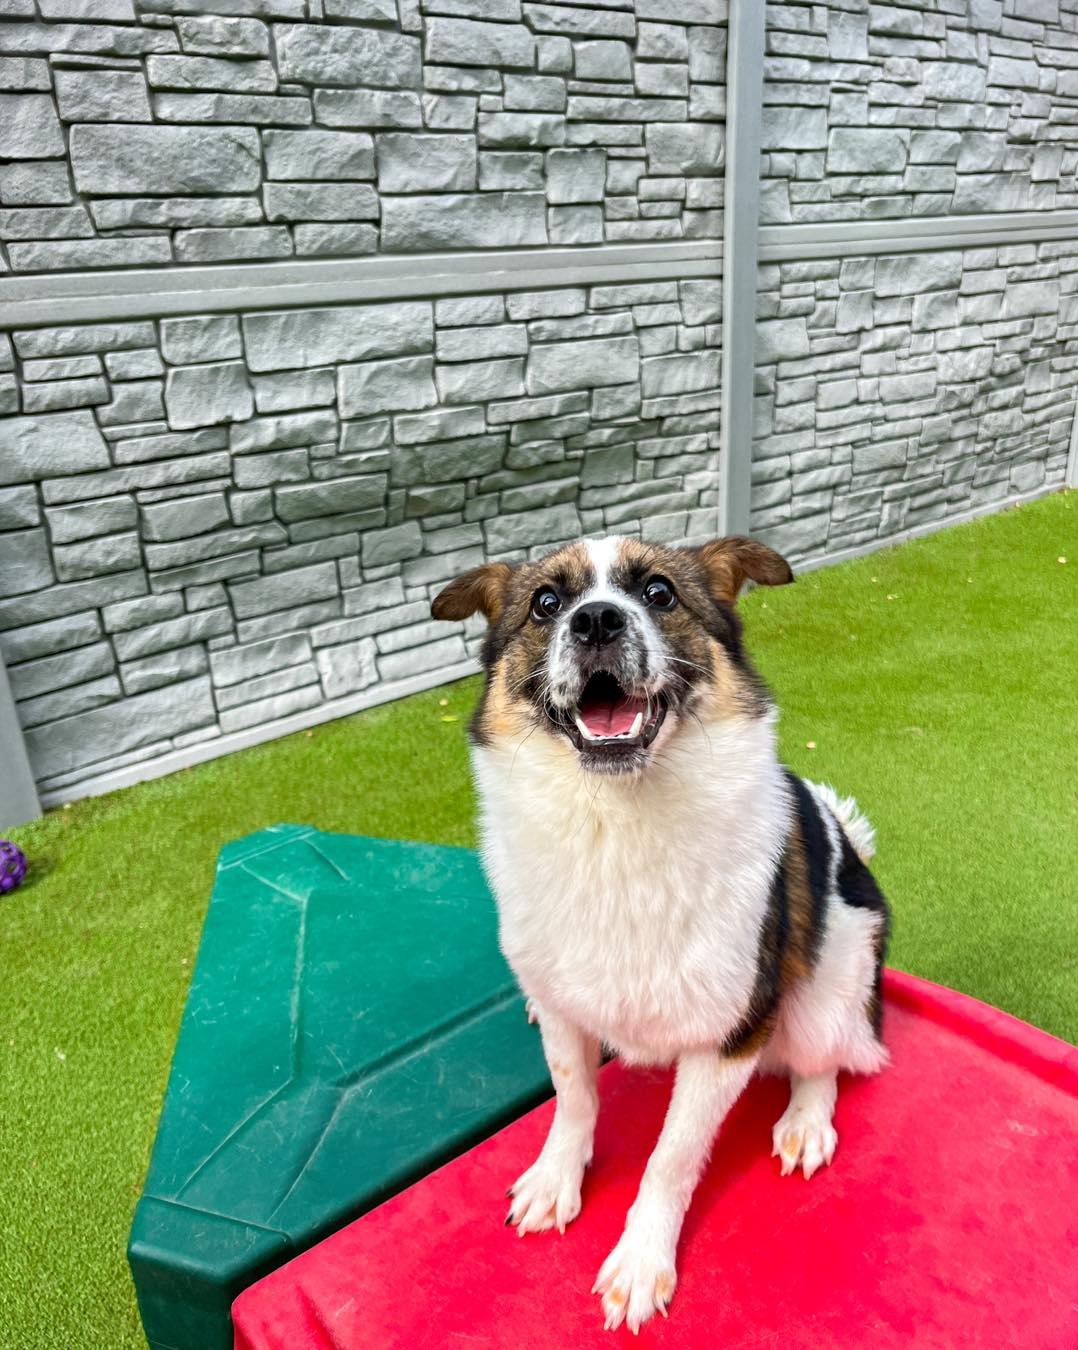 The pups, people, and playtime at Tucker Pup's Pet Resort! 

Located at the corner of Carpenter and Fulton, Tucker Pup&rsquo;s Pet Resort is the place to go for boarding, training, grooming, and doggy daycare in the West Loop!

Tucker Pup&rsquo;s is 